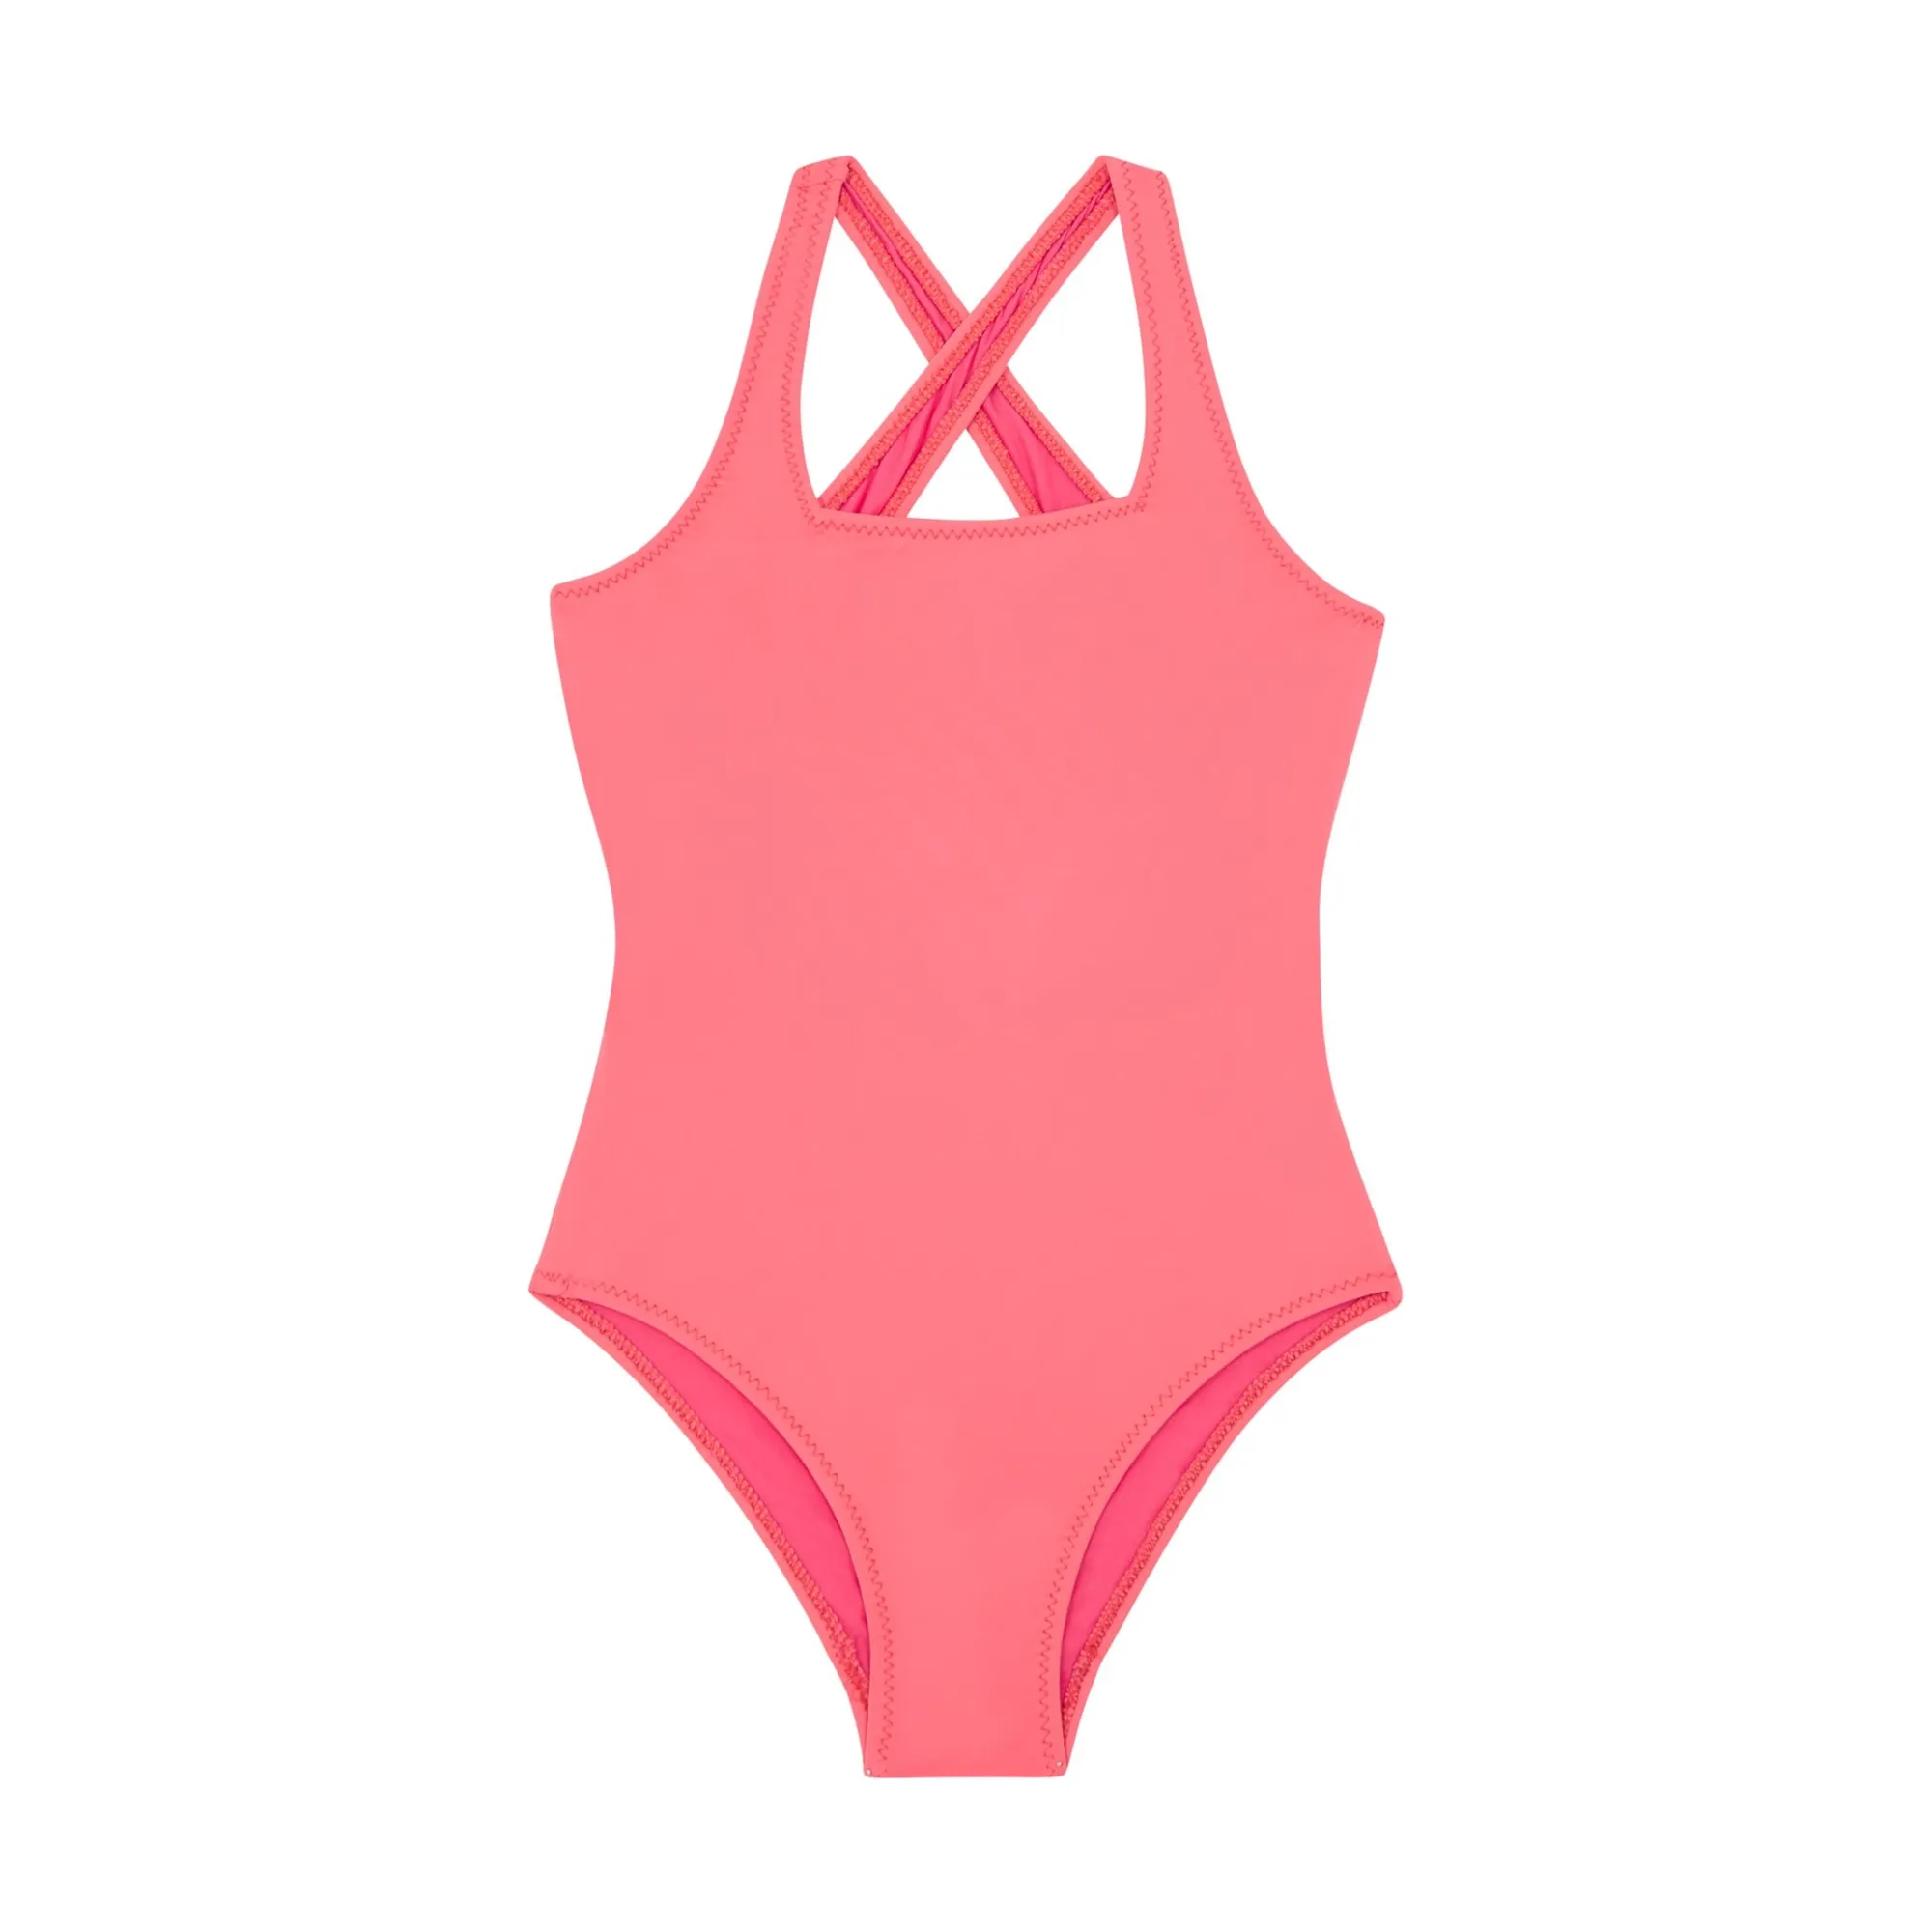 SMALLABLE BASICS - One-Piece Swimsuit - Coral